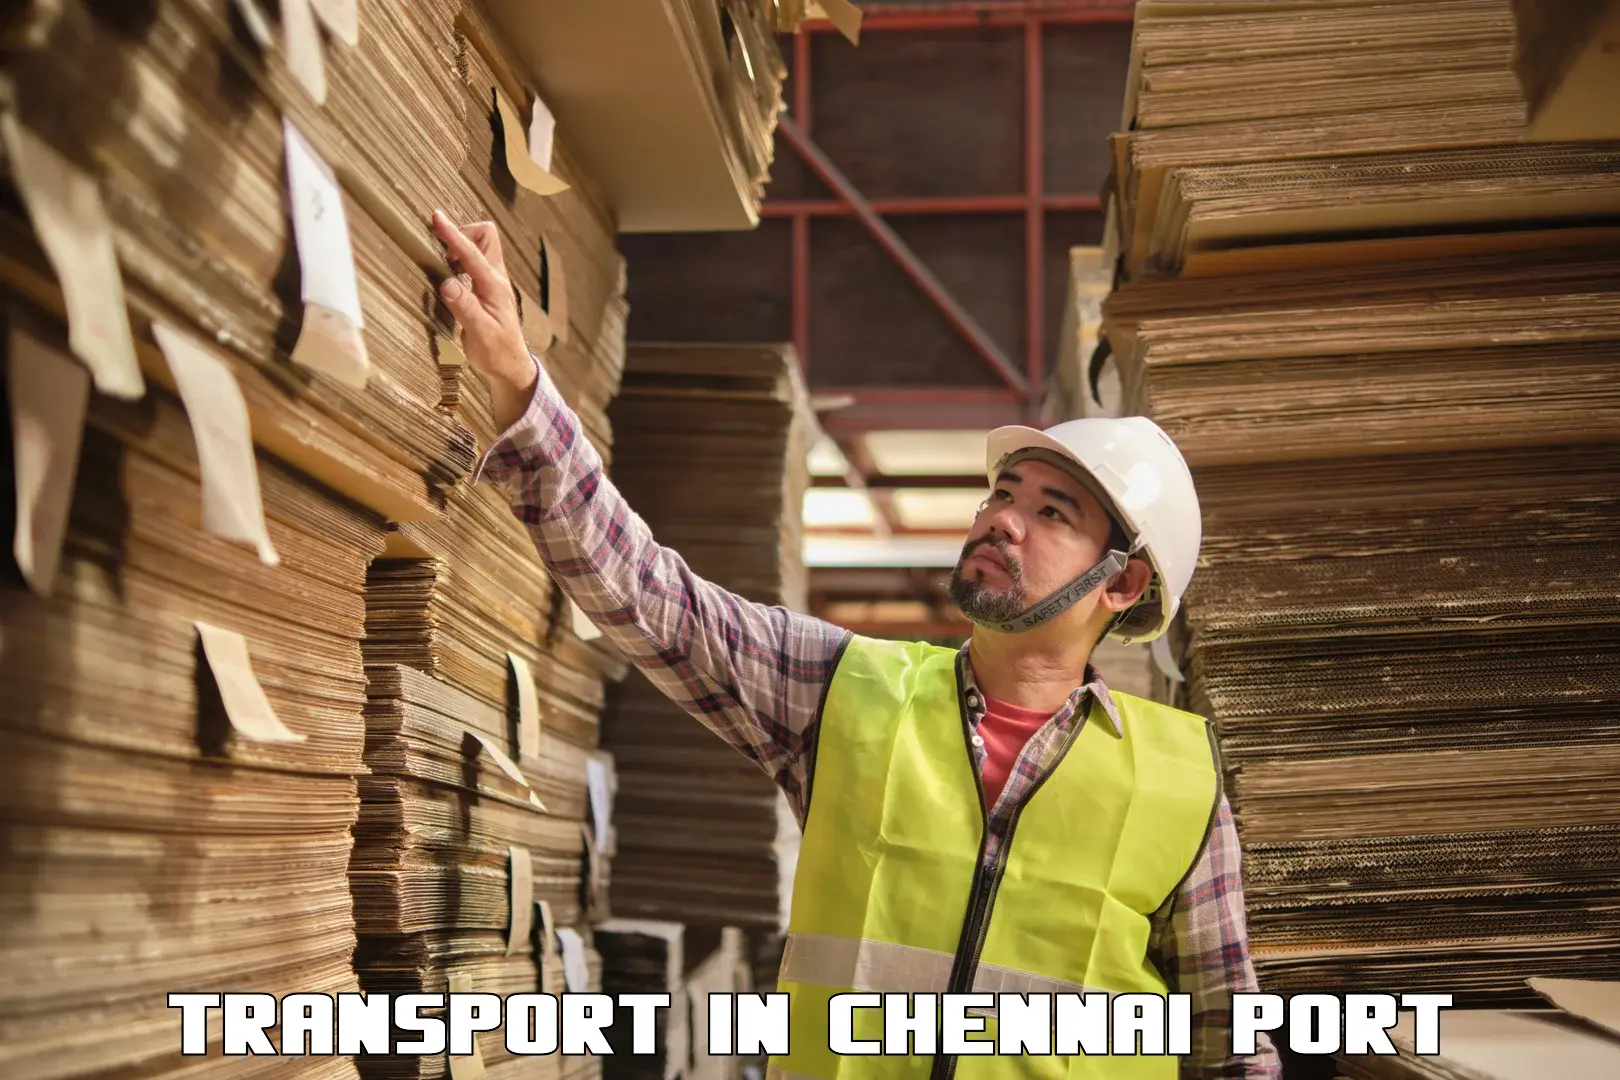 Transportation solution services in Chennai Port